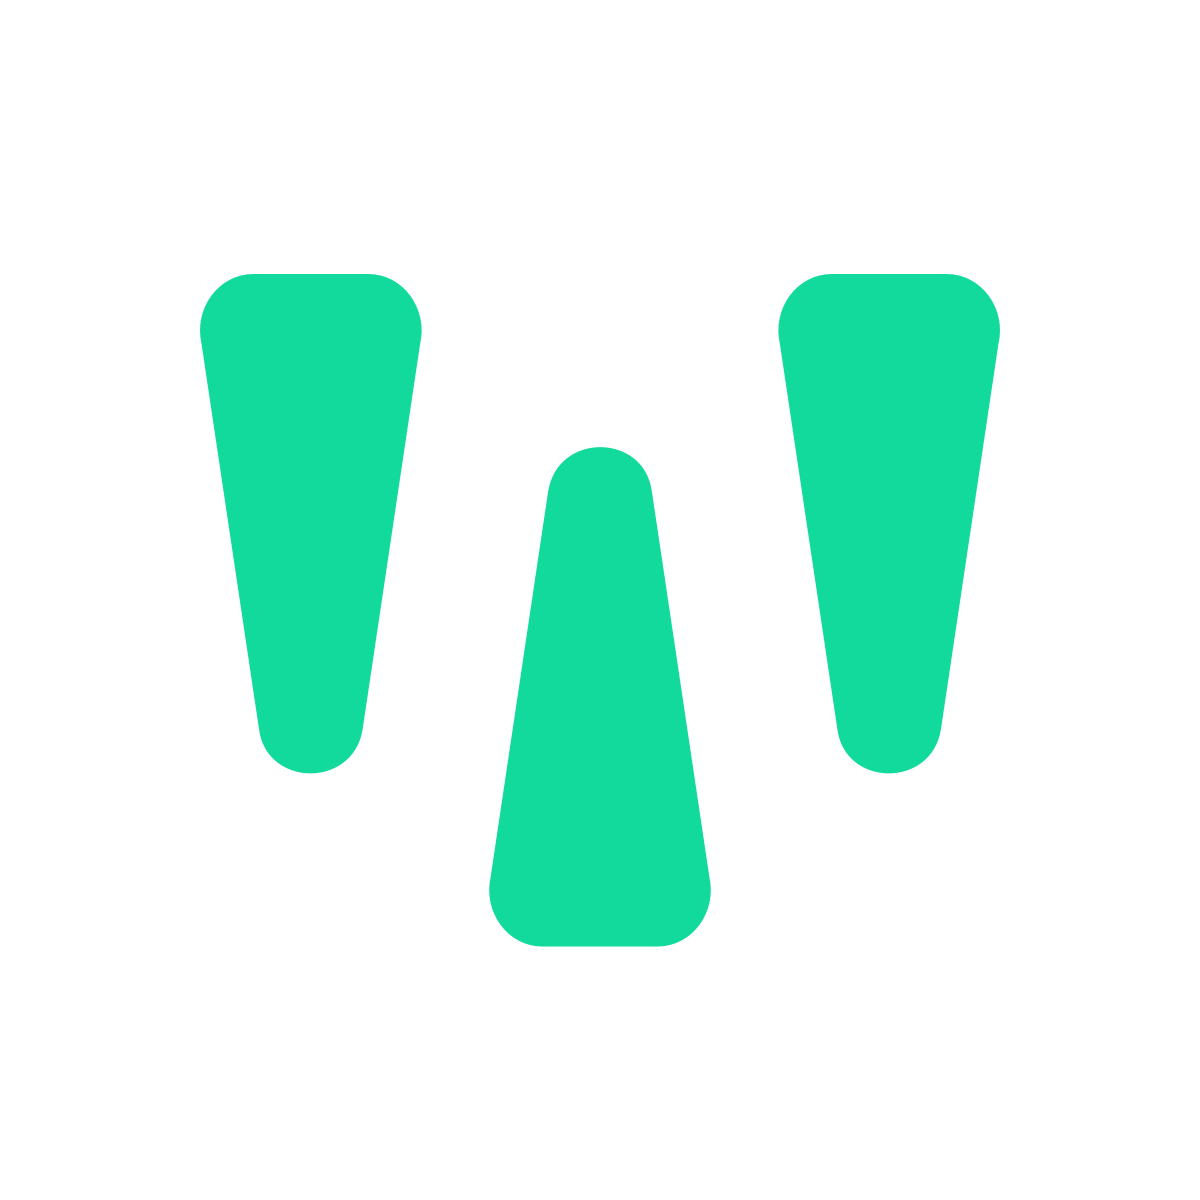 weclapp for Shopify